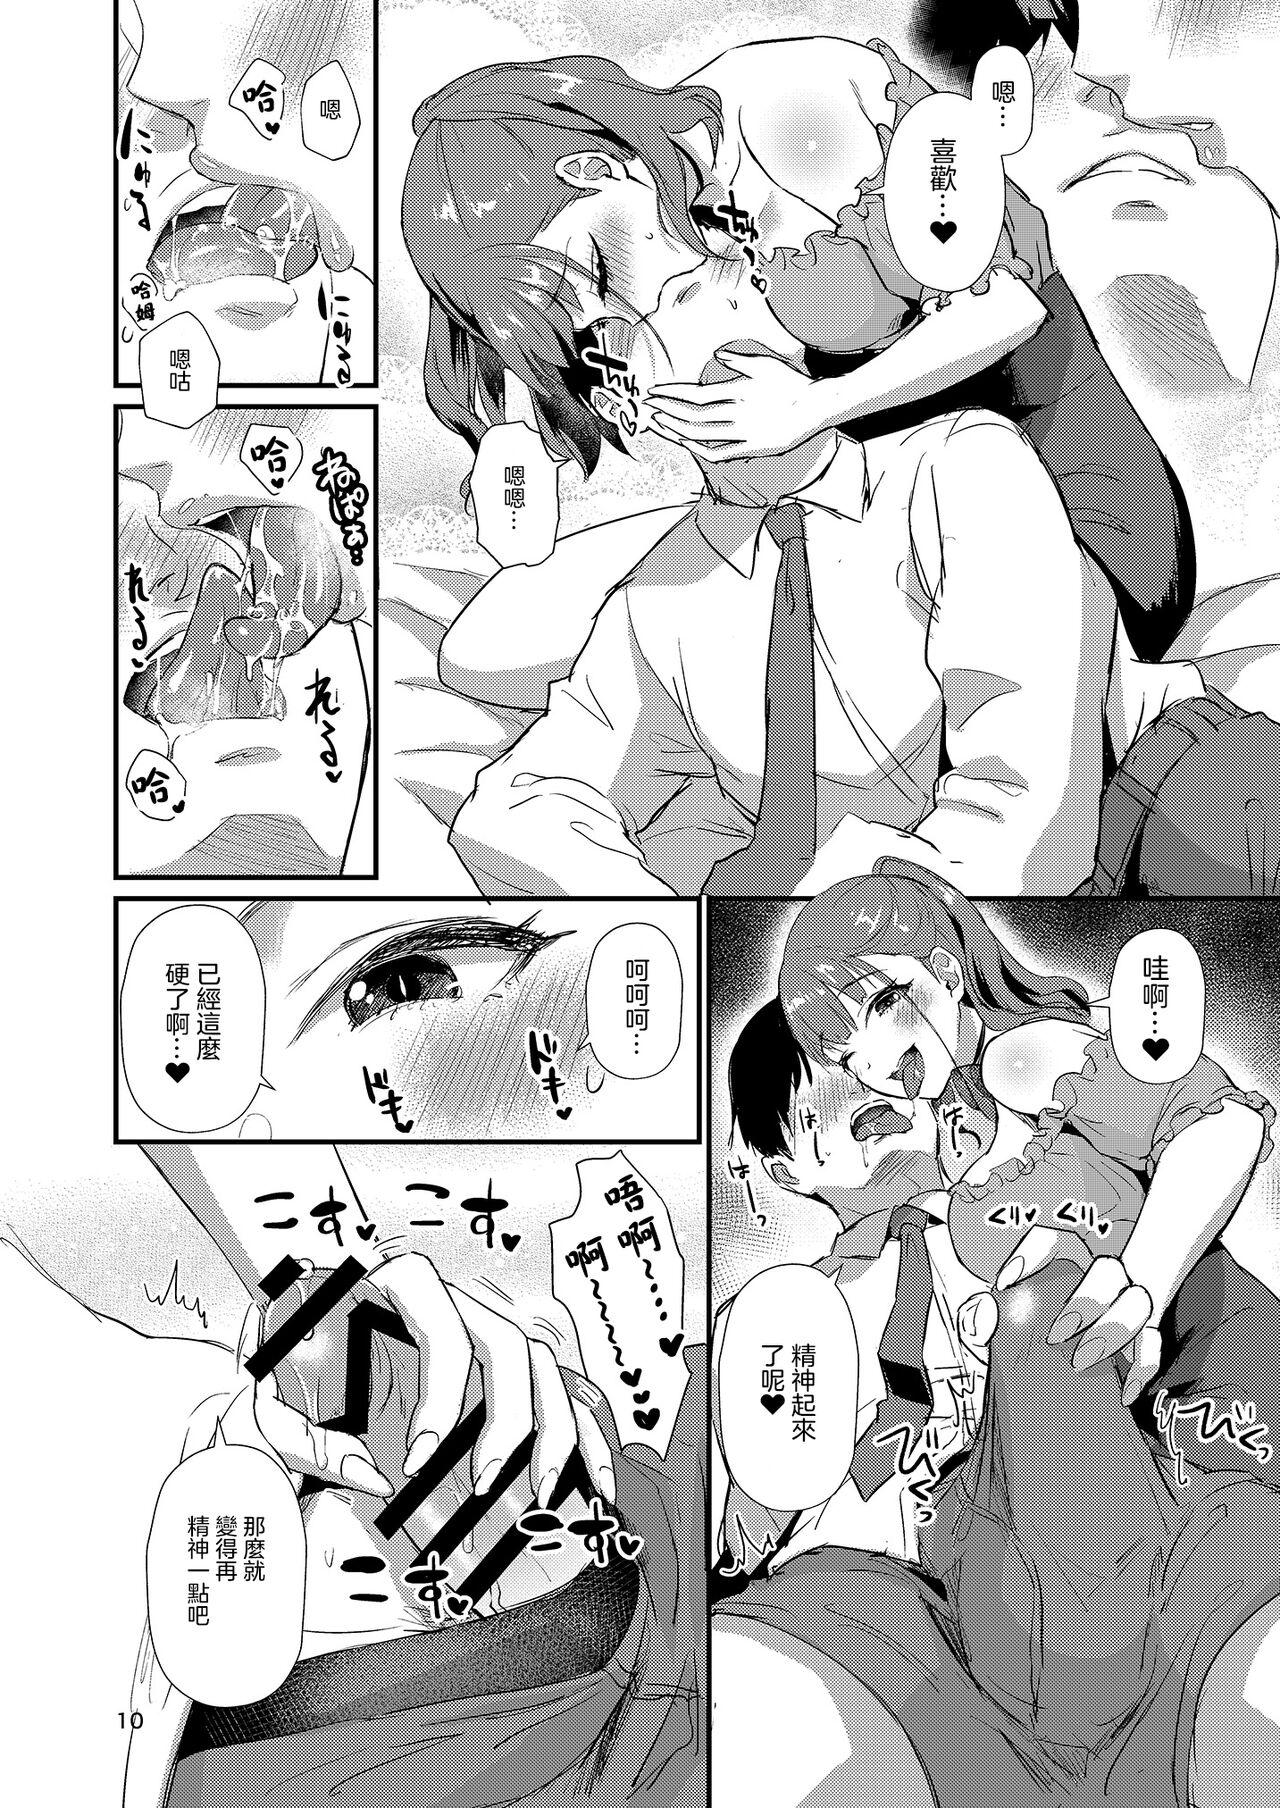 Behind Homehome Home e Youkoso! - Welcome to Home Home Home! | 歡迎來到誇誇屋！ Free Fucking - Page 11